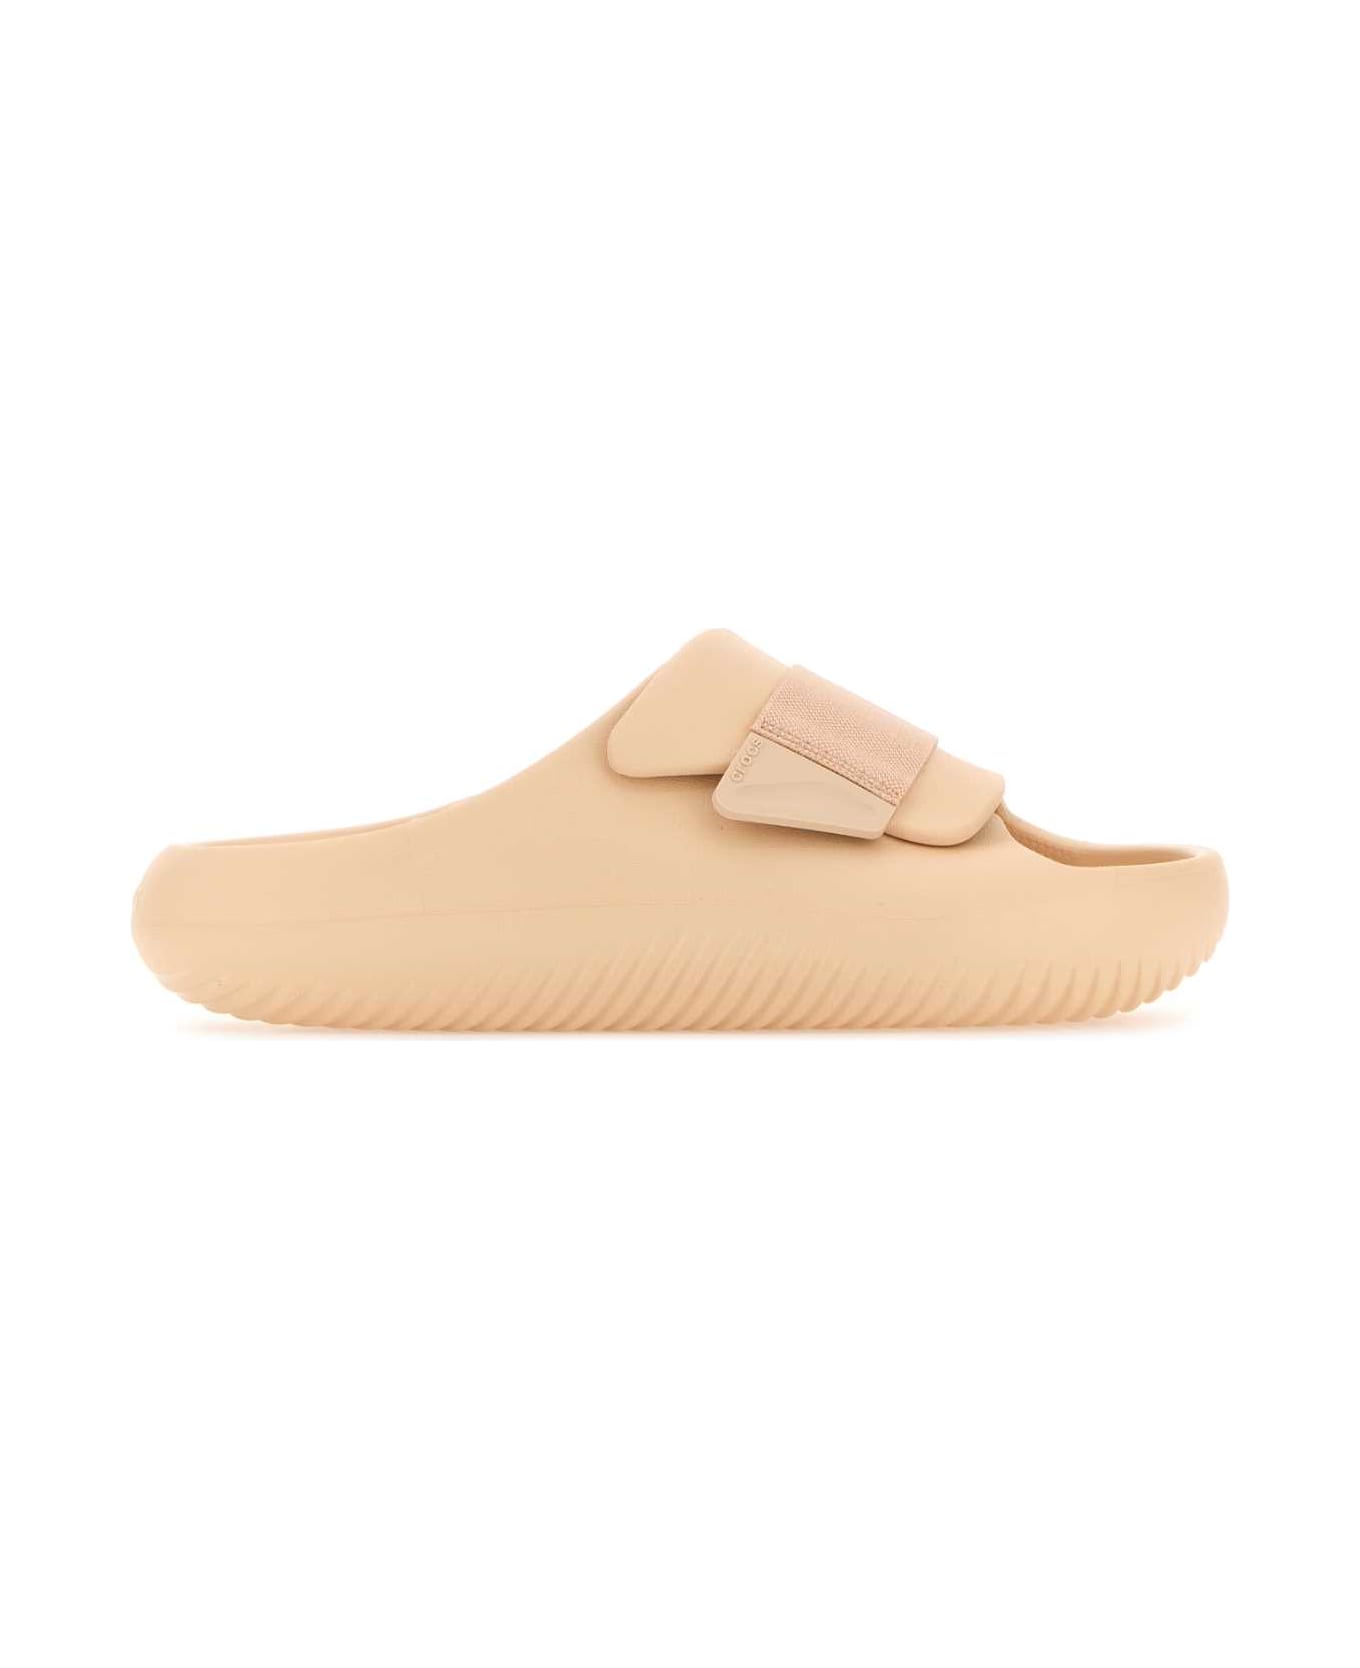 Crocs Pastel Orange Rubber Mellow Luxe Recovery Slippers - SHITAKE その他各種シューズ